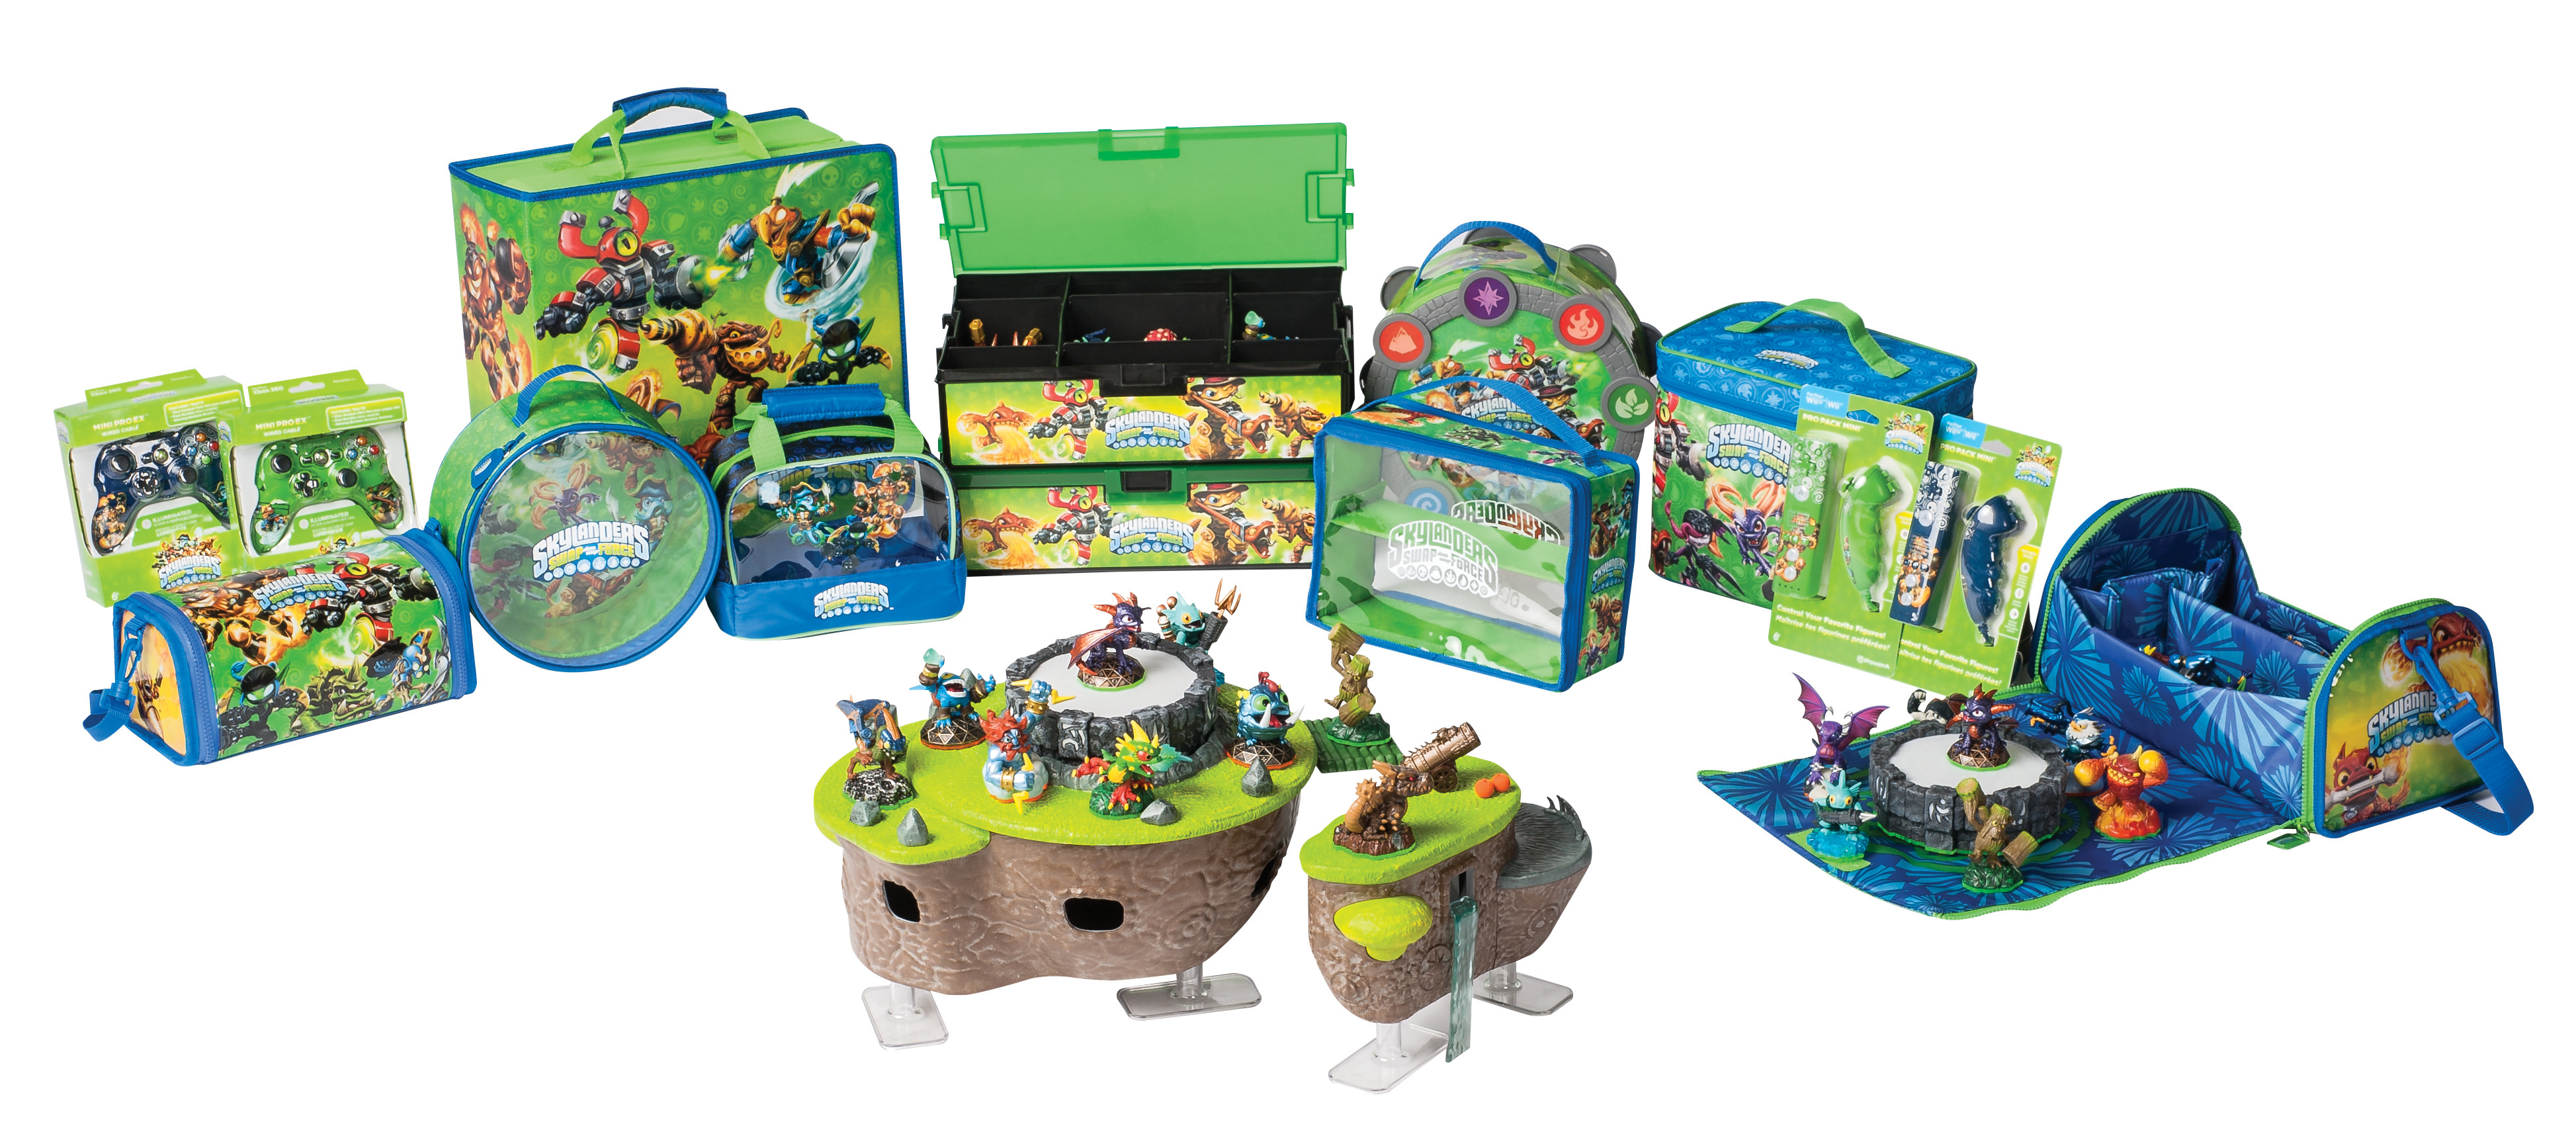 Celebrate the Launch Skylanders SWAP ForceTM with Licensed Accessories | Business Wire